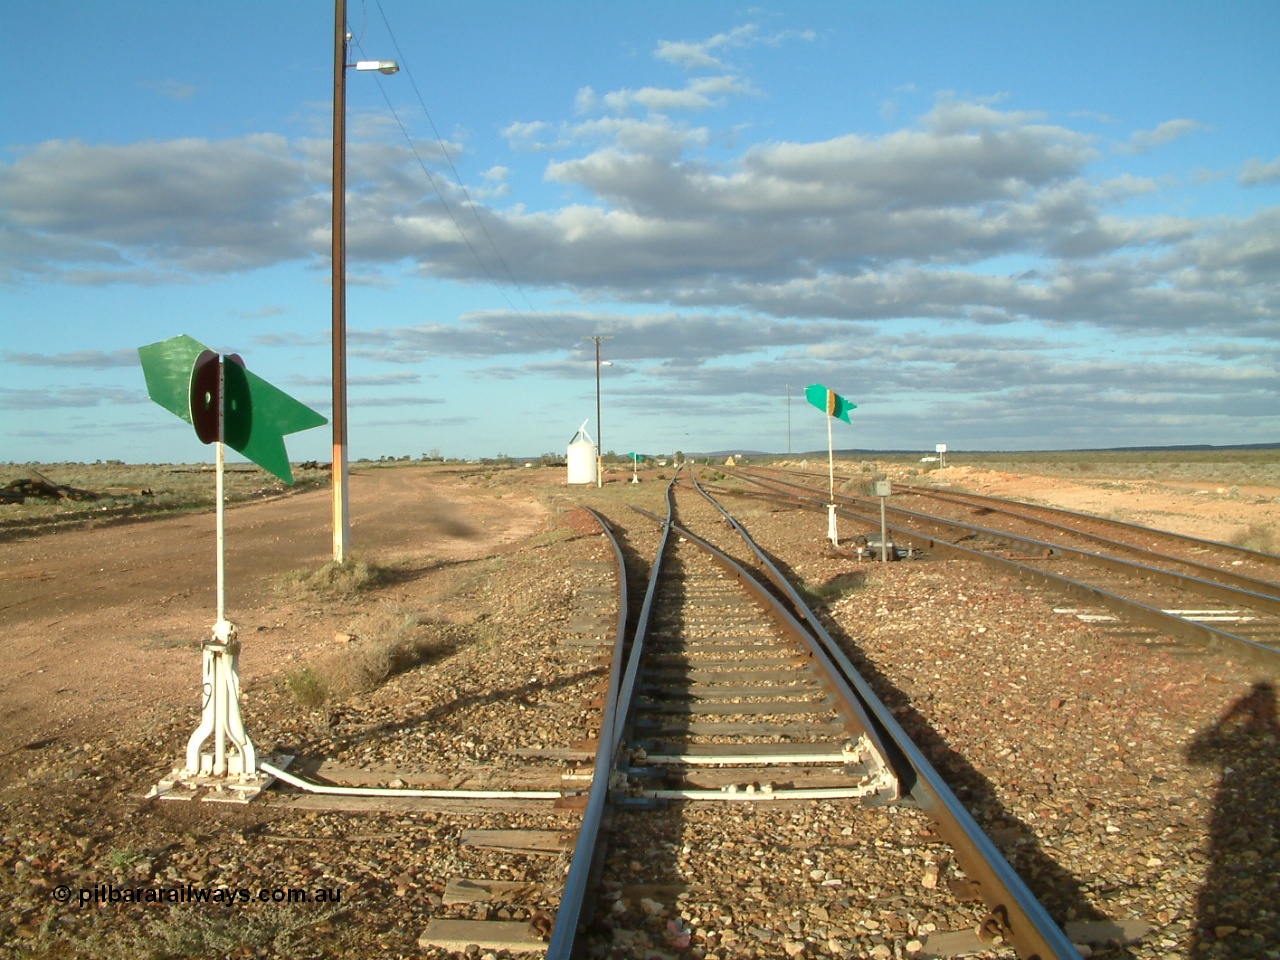 030415 171948
Tarcoola, at the 504.5 km, looking east along the Central Australian Line, Trans Australian is the middle road with the loop on the far right. Tarcoola is the junction for the TAR and CAR railways. [url=https://goo.gl/maps/81W8BzbCjzqJFd1PA]GeoData location[/url]. 15th April 2003.
